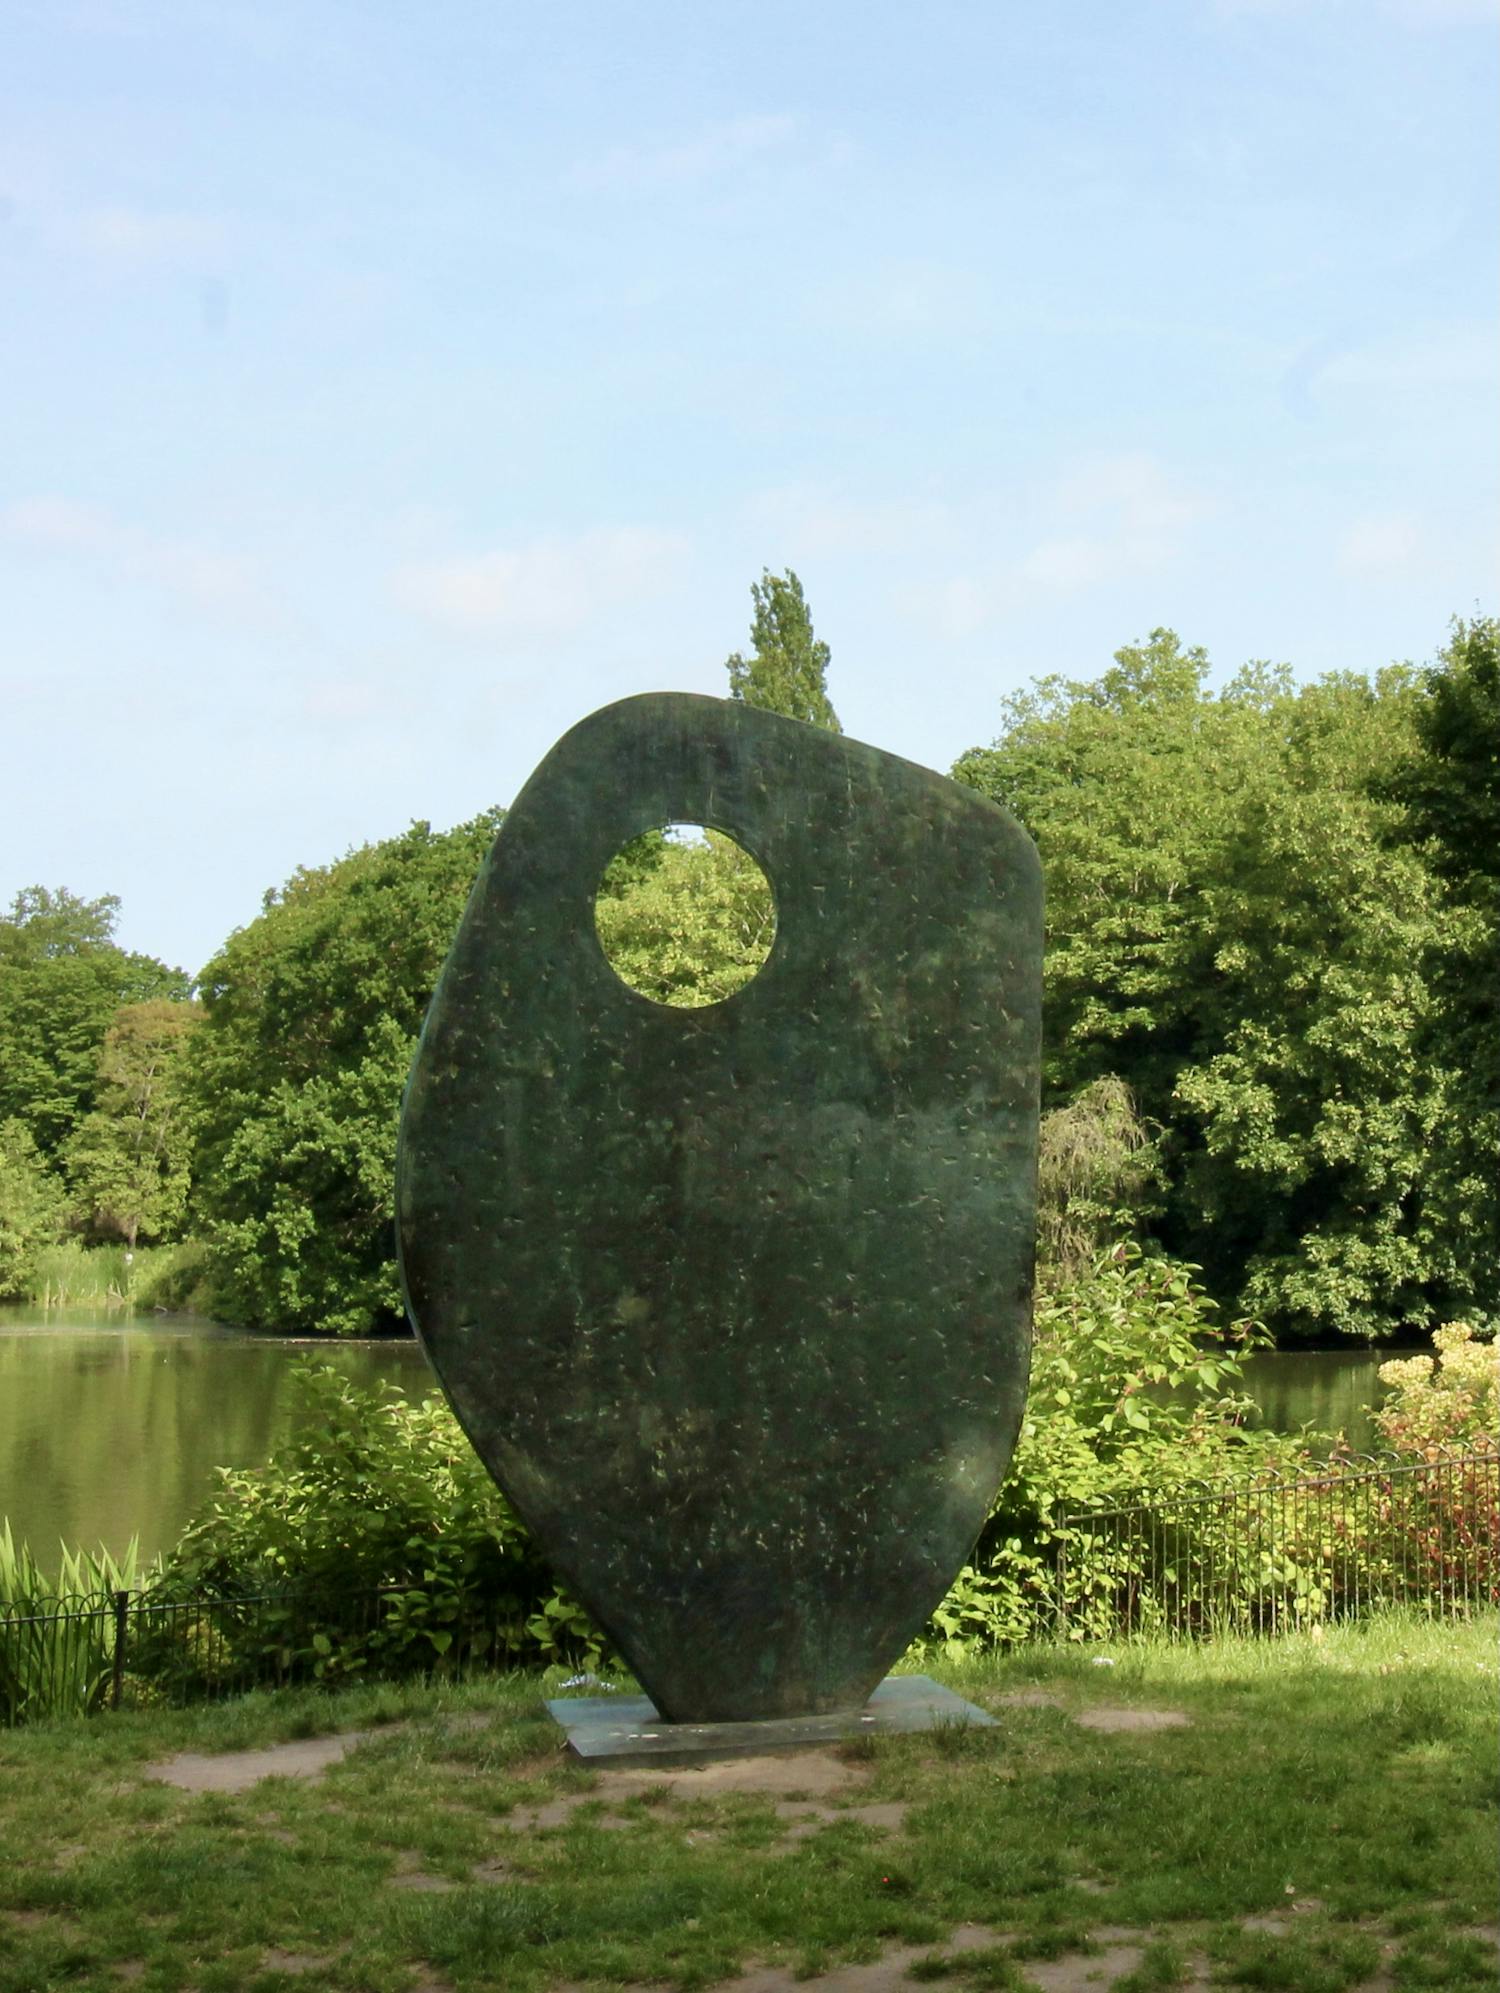 [ID: This photograph shows an abstract brass sculpture in an angular ovoid form with a circular hole in the top left-hand corner. The sculpture is wider at the top and tapers at the bottom where it meets the concrete base it is placed on. The sculpture is located on a grassy bank next to a lake beyond which a line of trees can be seen. End of ID]